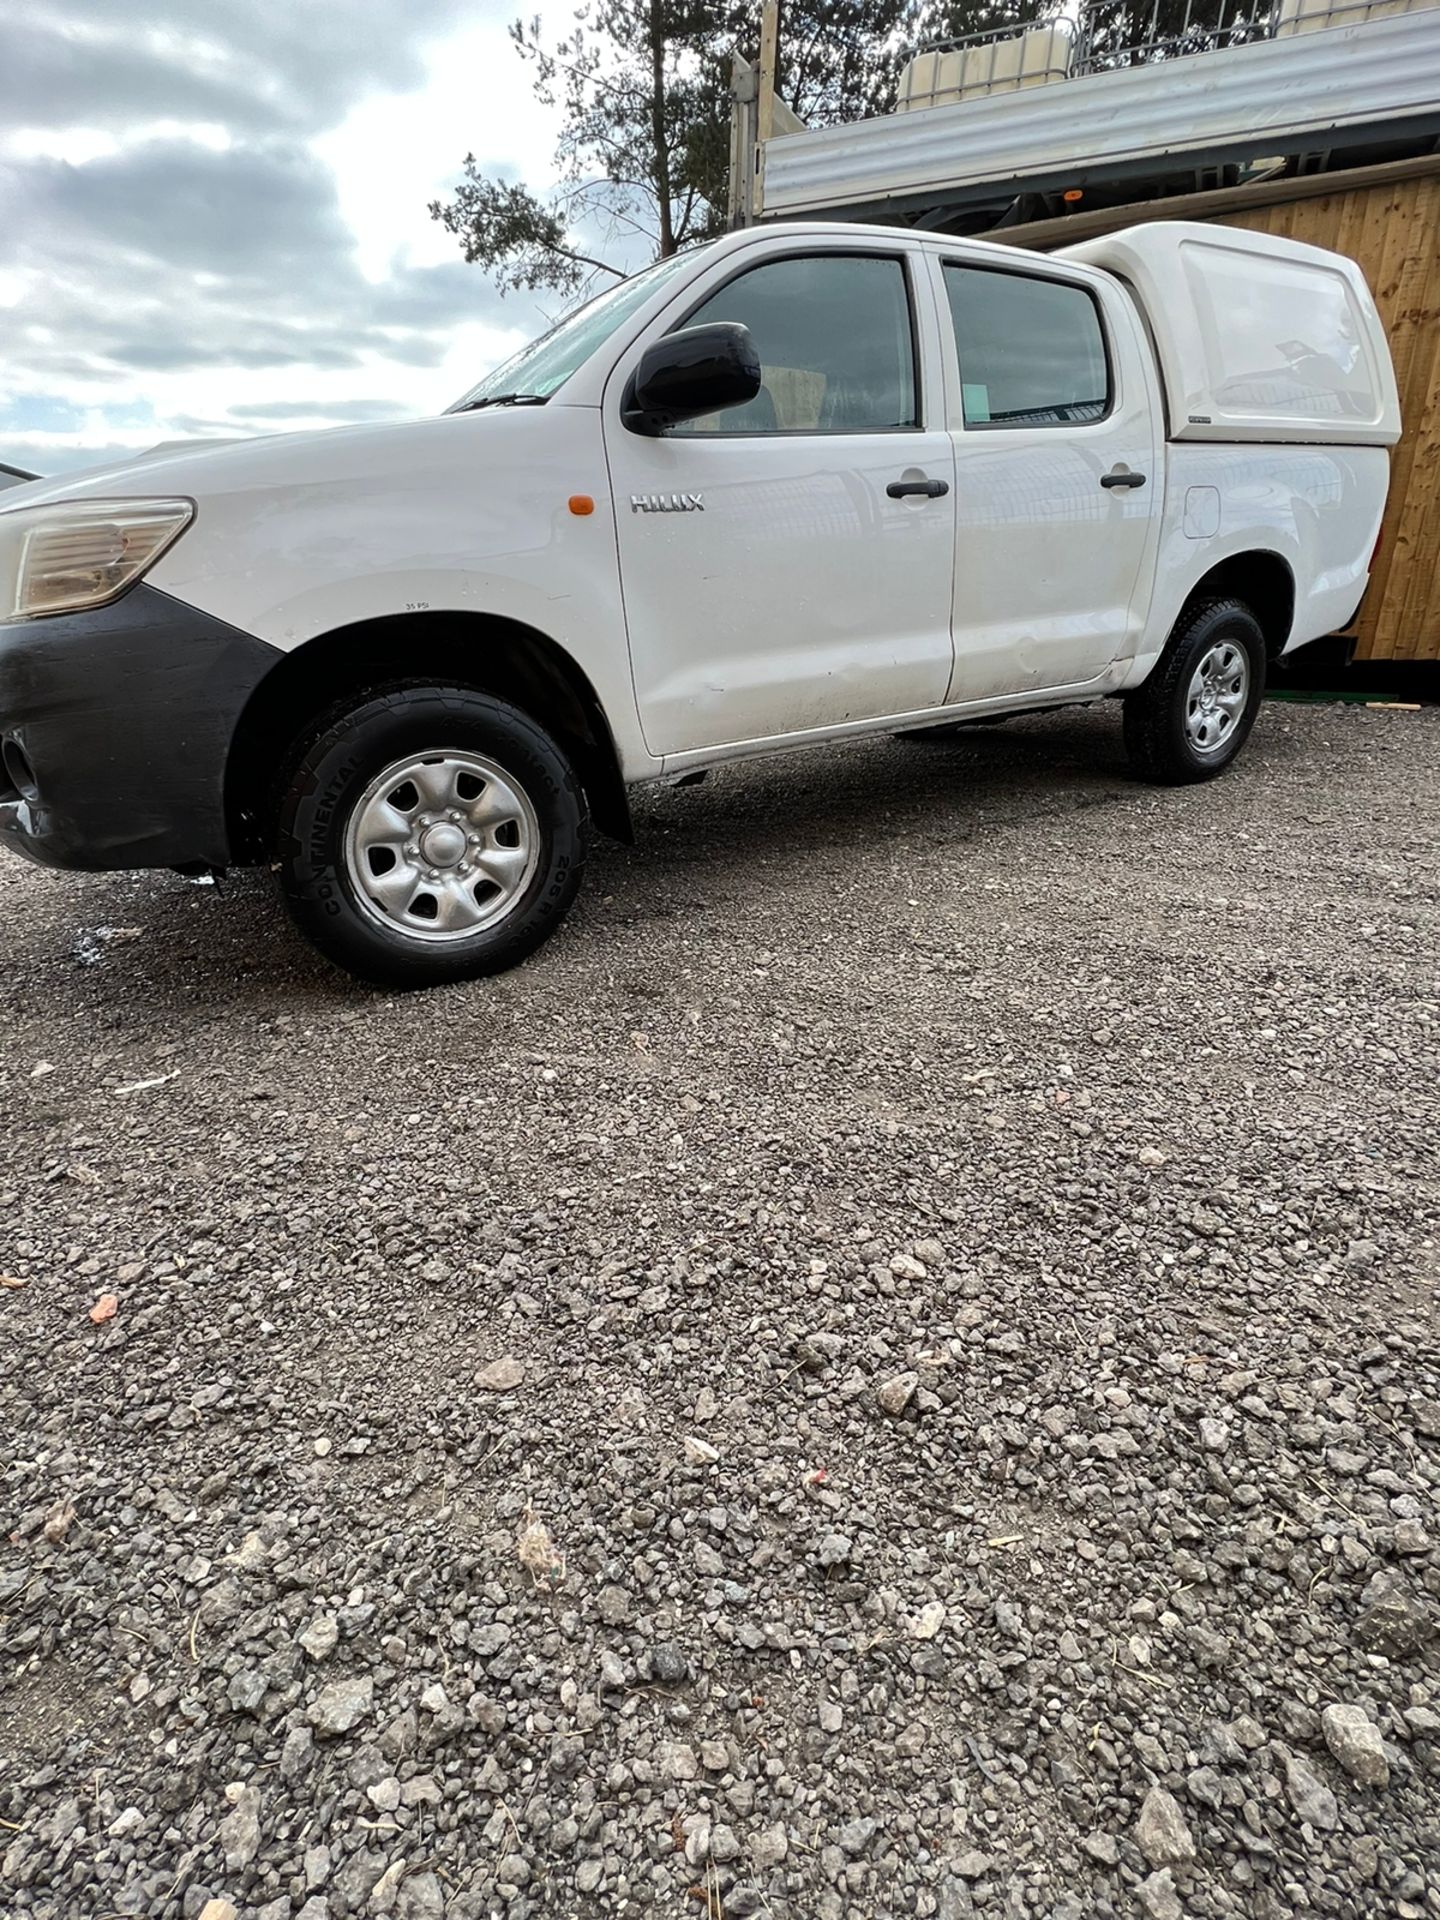 2012 TOYOTA HILUX HL2 PICK UP - DAB RADIO - A/C - ELECTRIC MIRRORS. - Image 14 of 14